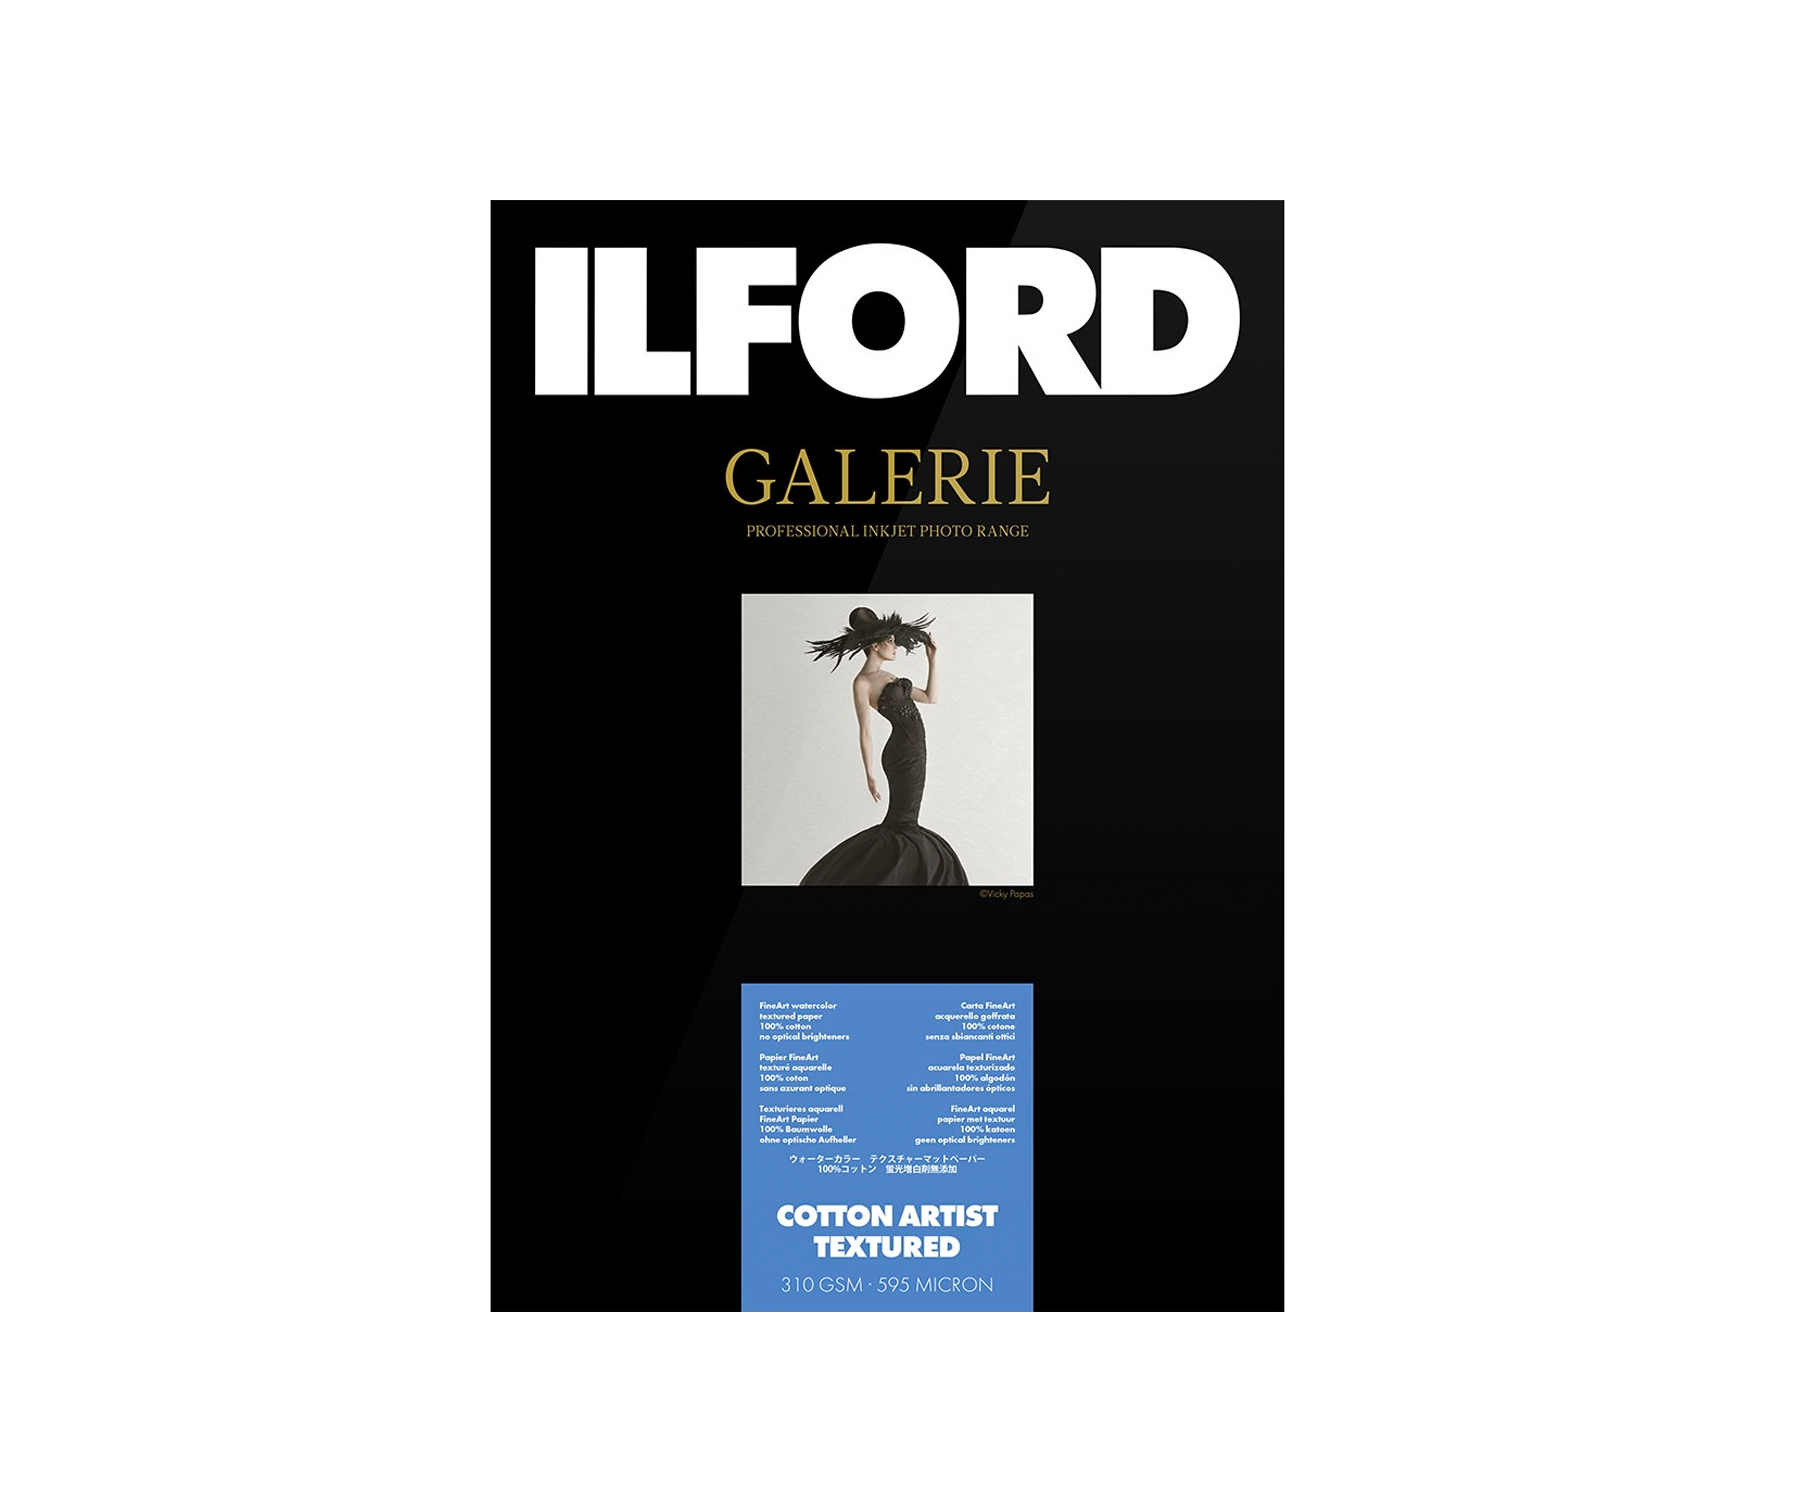 Ilford Galerie Textured Cotton Rag 310GSM A3 (25… Cathay Photo